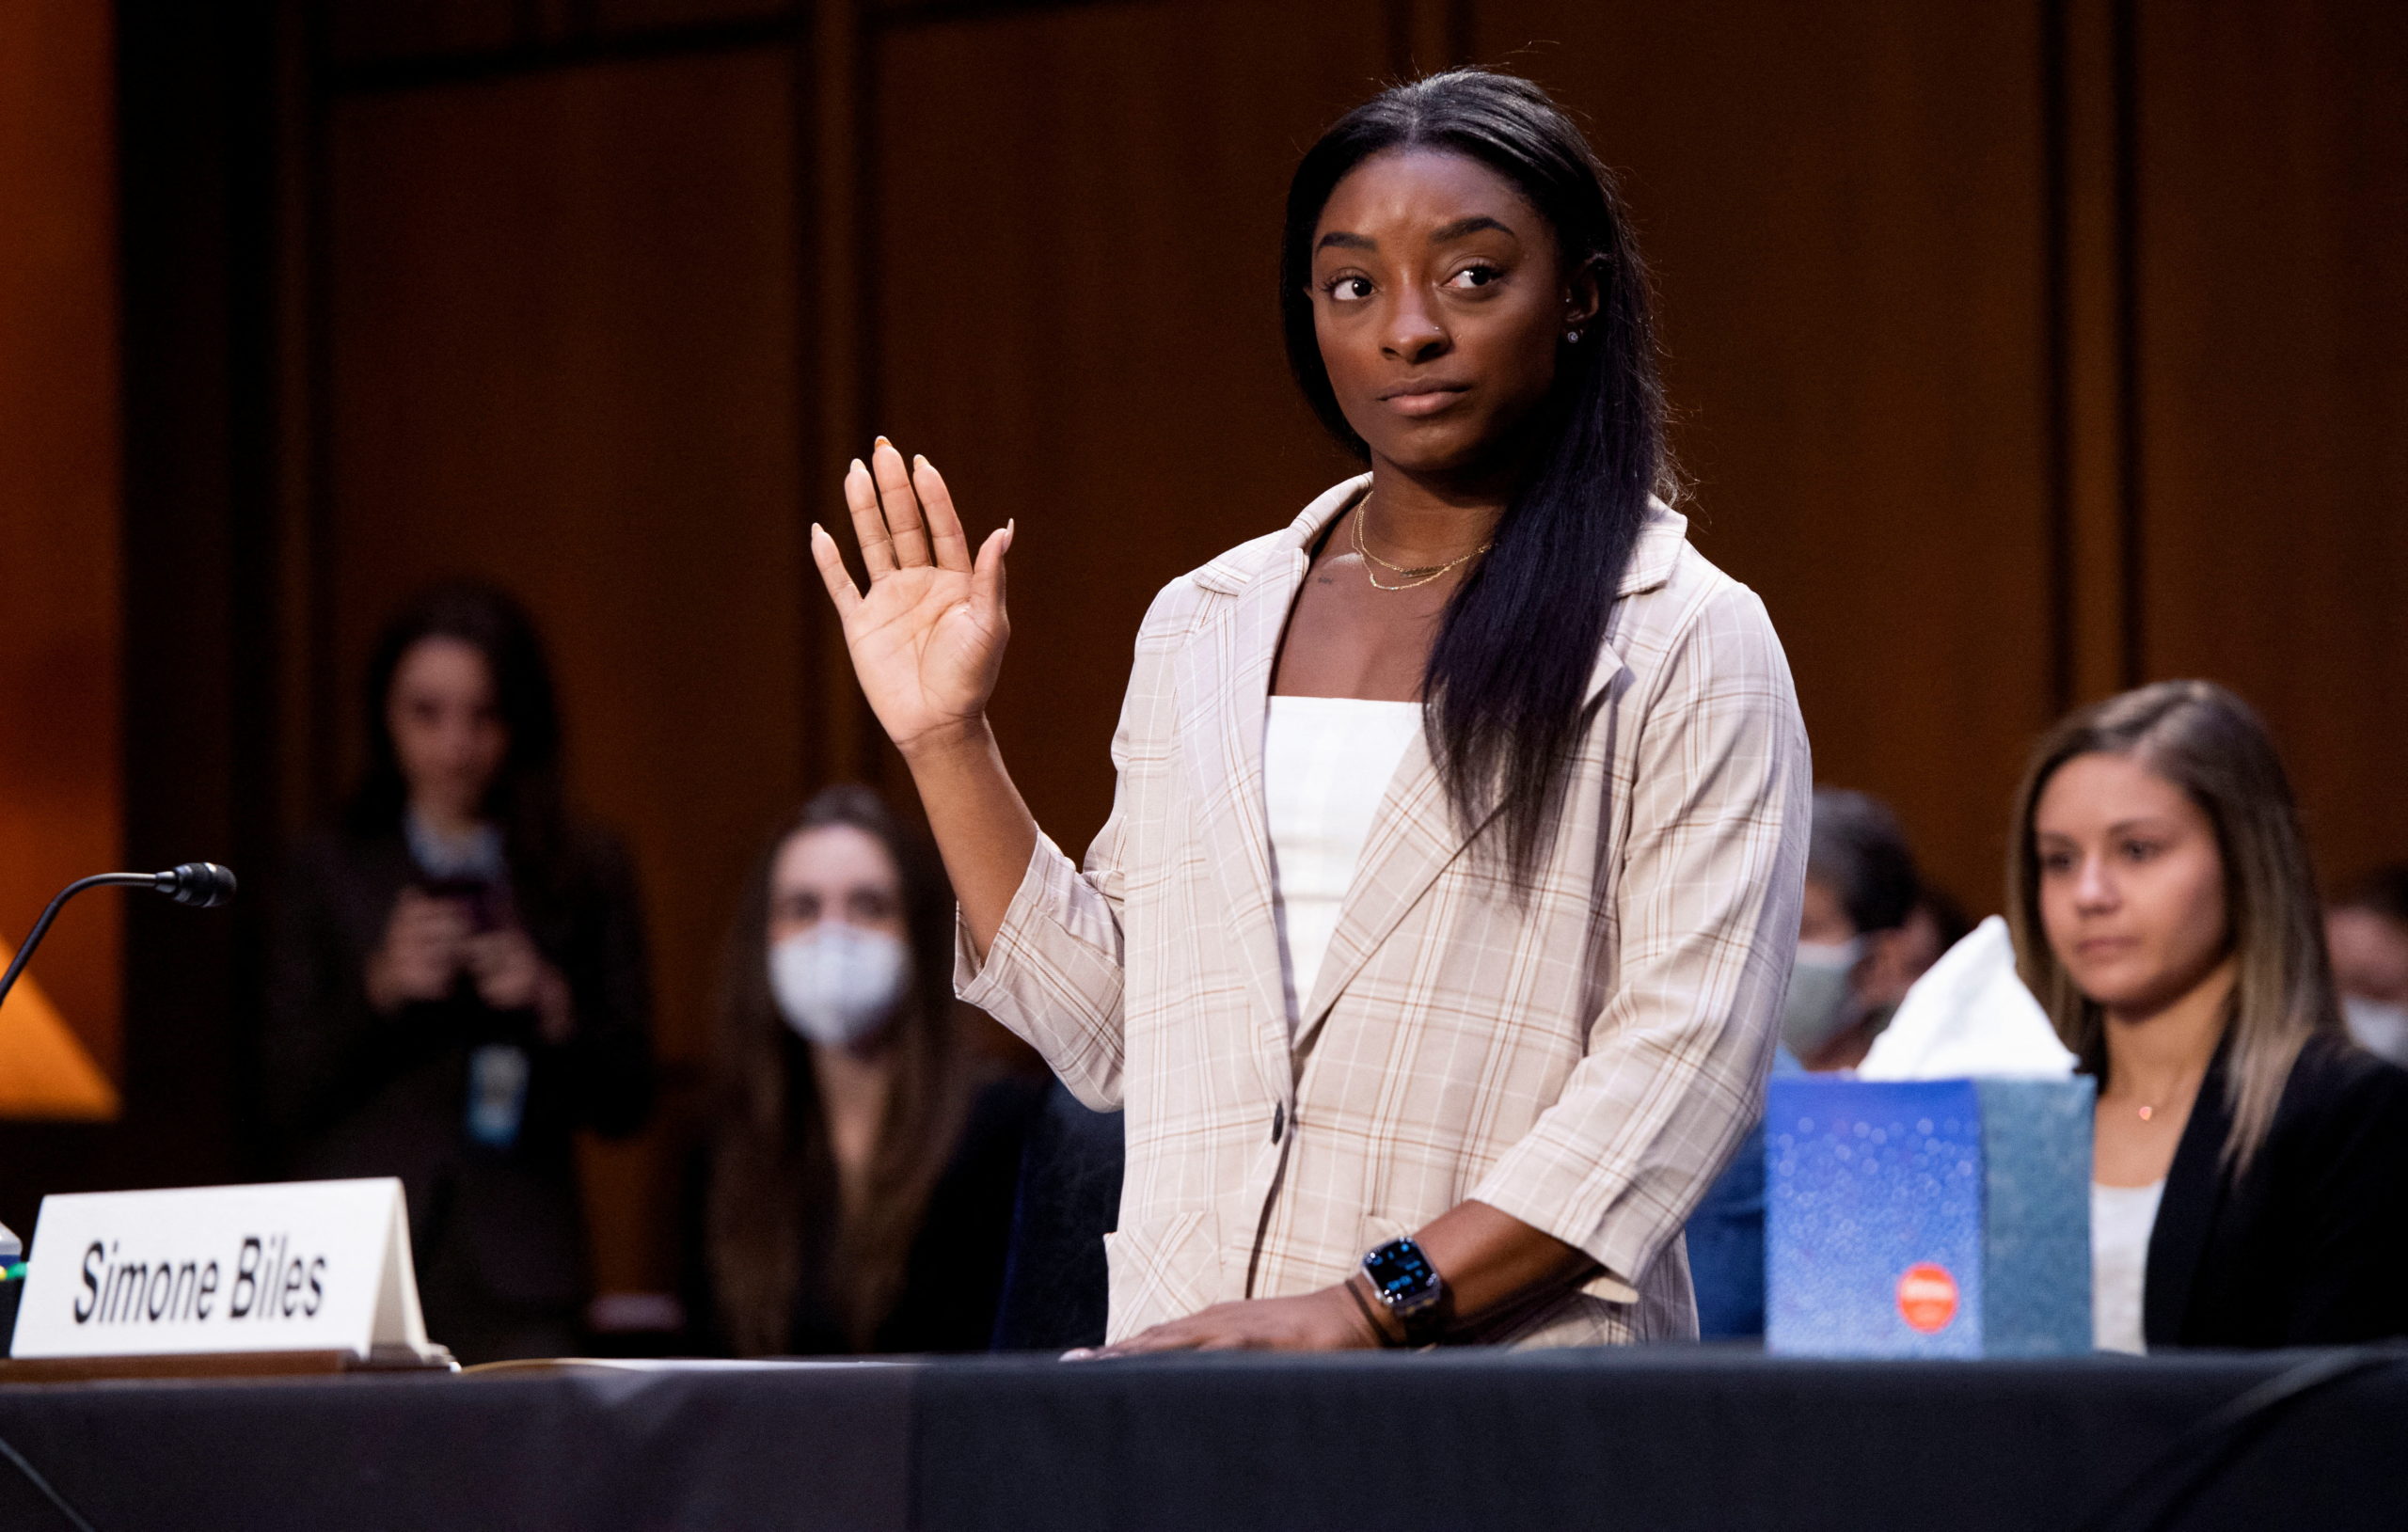 FILE PHOTO: U.S. Olympic gymnast Simone Biles is sworn in to testify during a Senate Judiciary hearing about the Inspector General's report on the FBI handling of the Larry Nassar investigation of sexual abuse of Olympic gymnasts, on Capitol Hill, in Washington, D.C., U.S., September 15, 2021. Saul Loeb/Pool via REUTERS